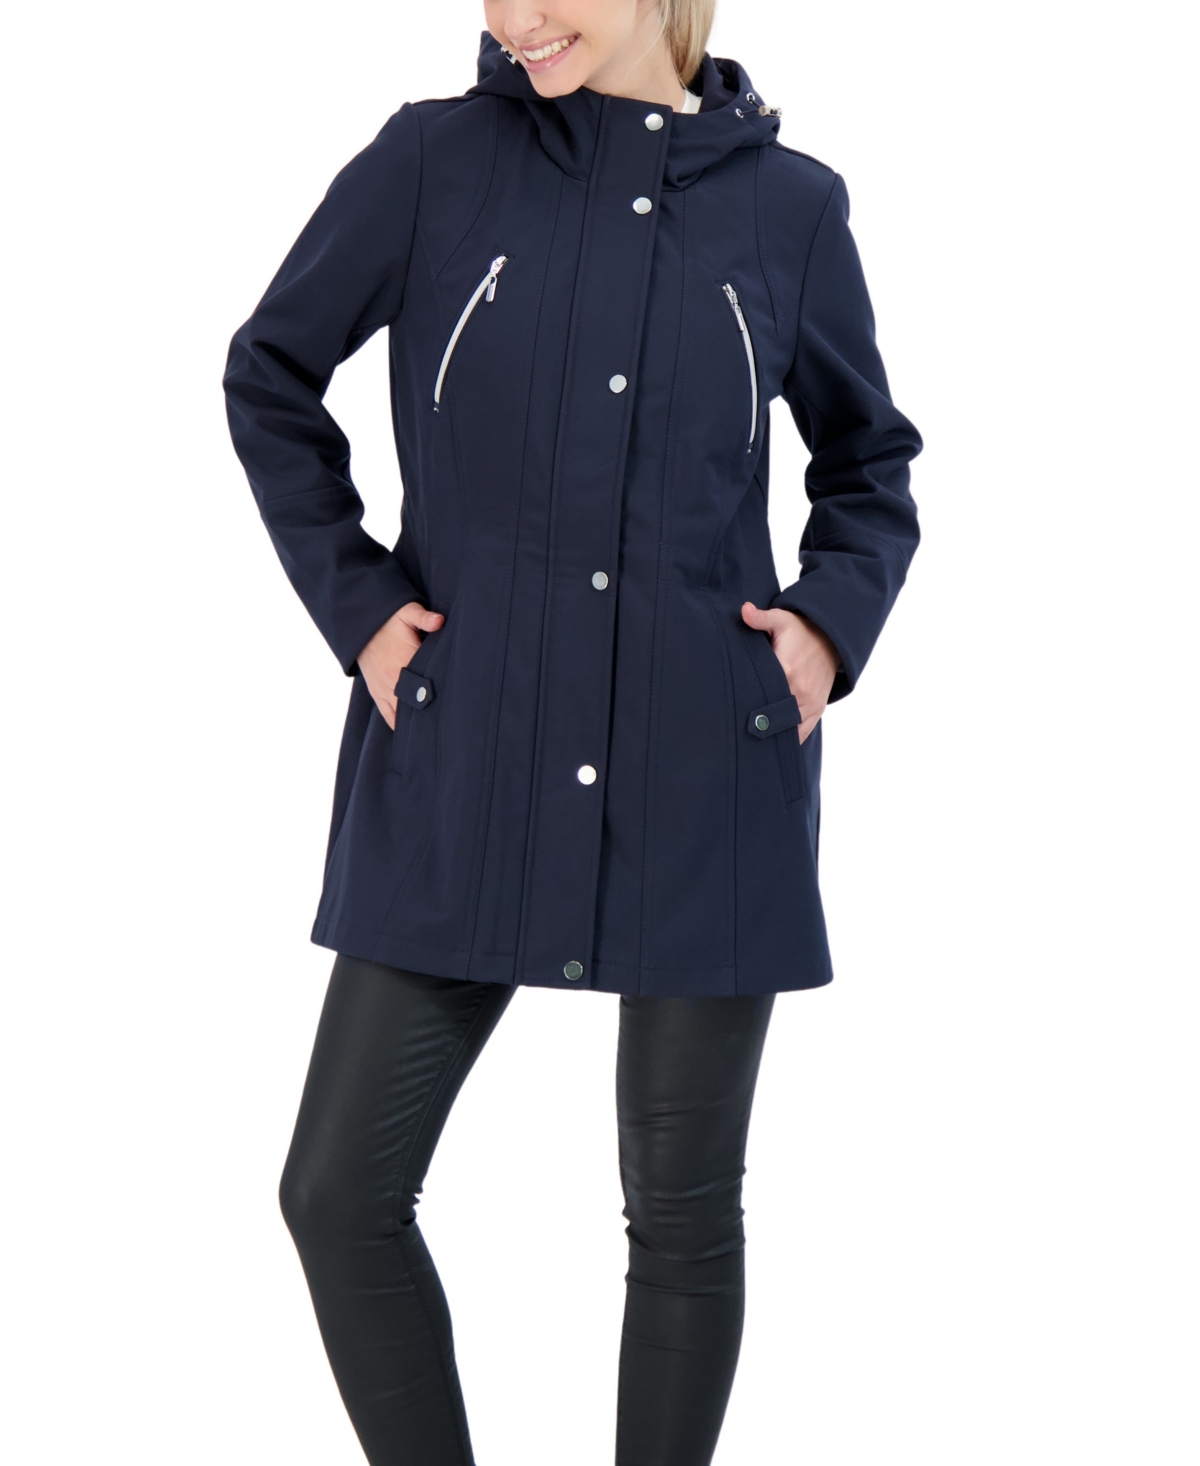 Women's Soft Shell Jacket with Hood - Navy